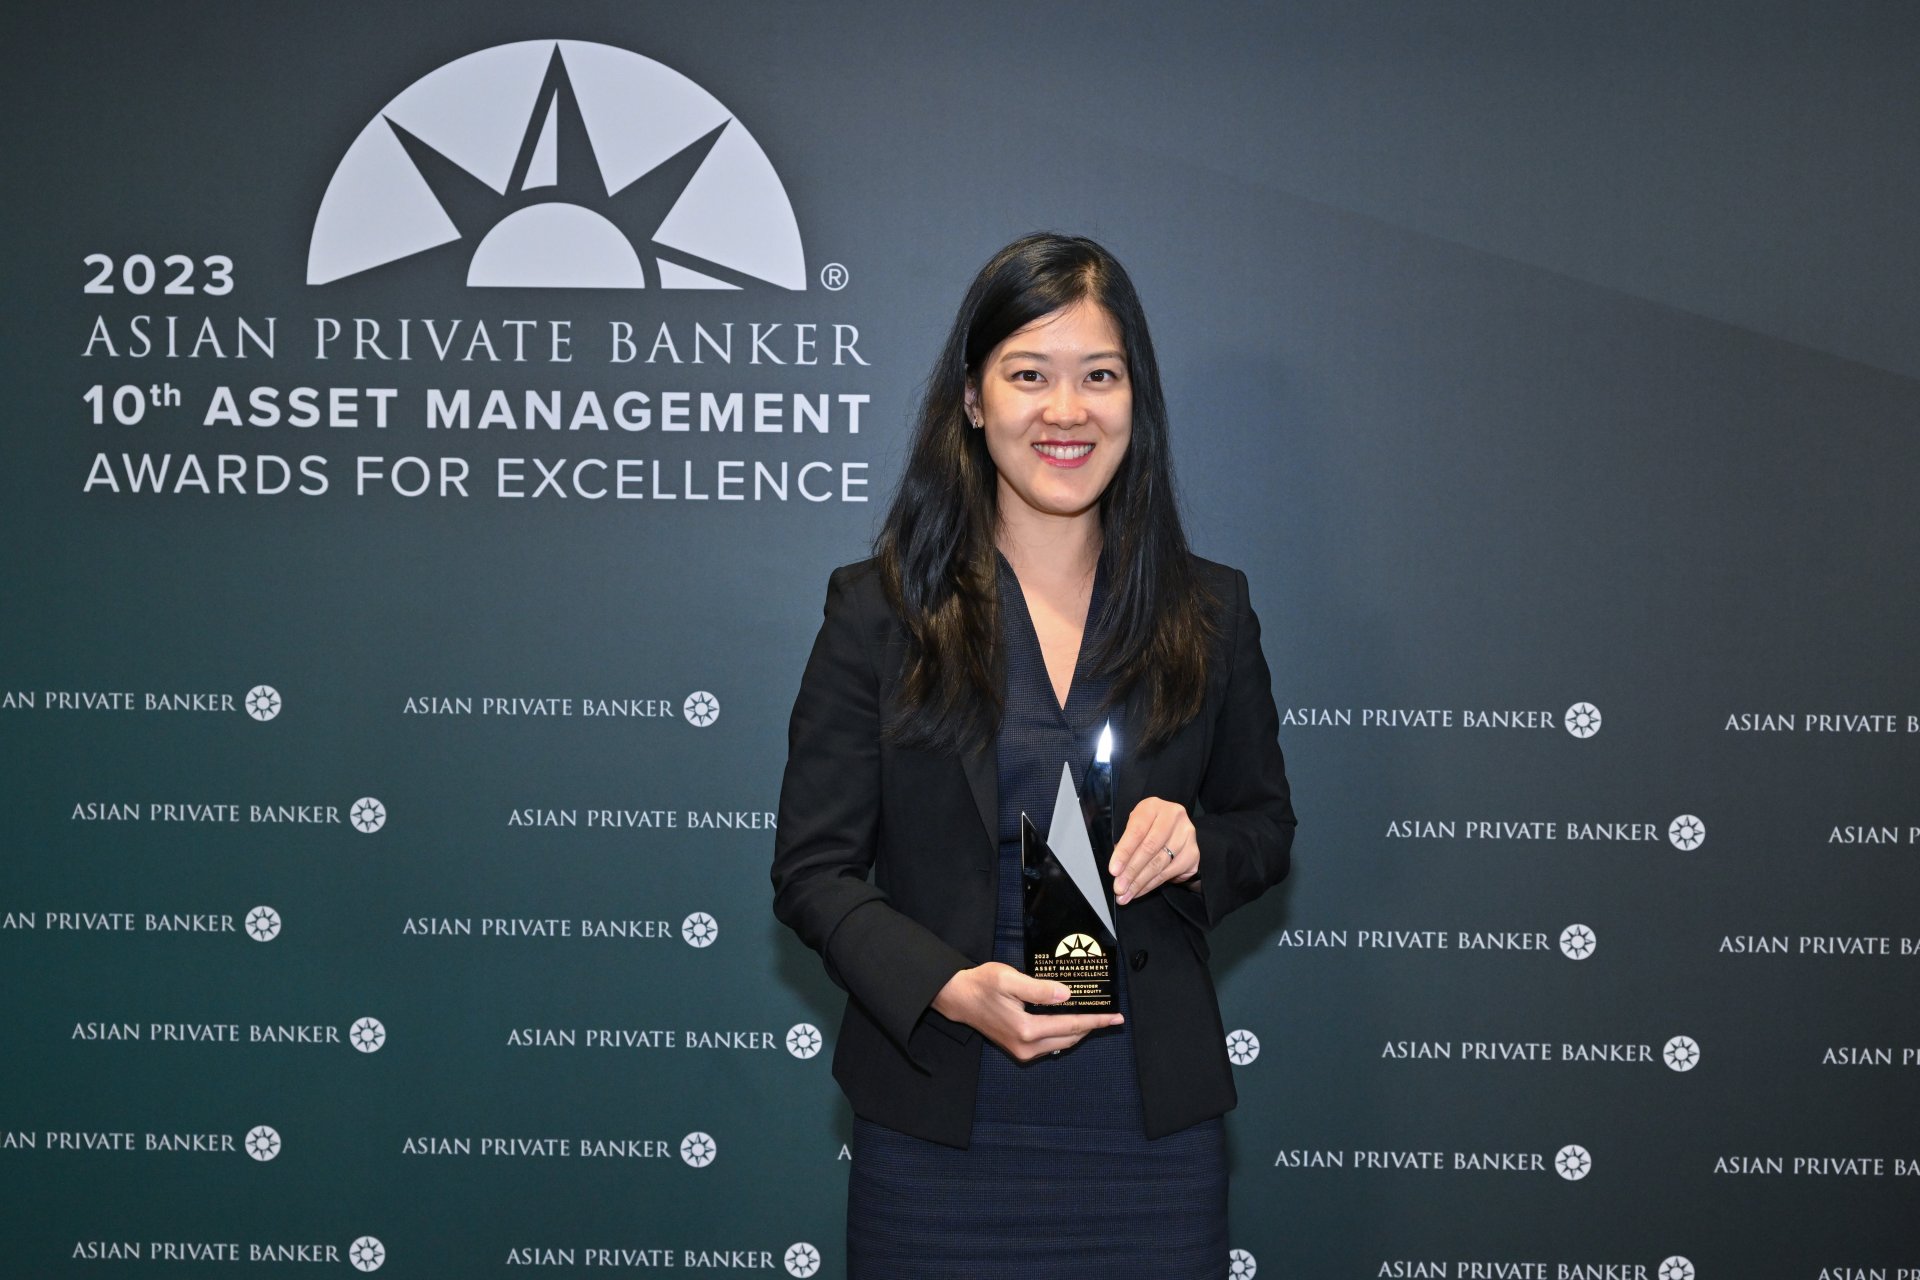 Accepting Best Fund Provider - China A-Shares Equity at Asian Private Banker’s 10th Asset Management Awards for Excellence is Jessica Tea